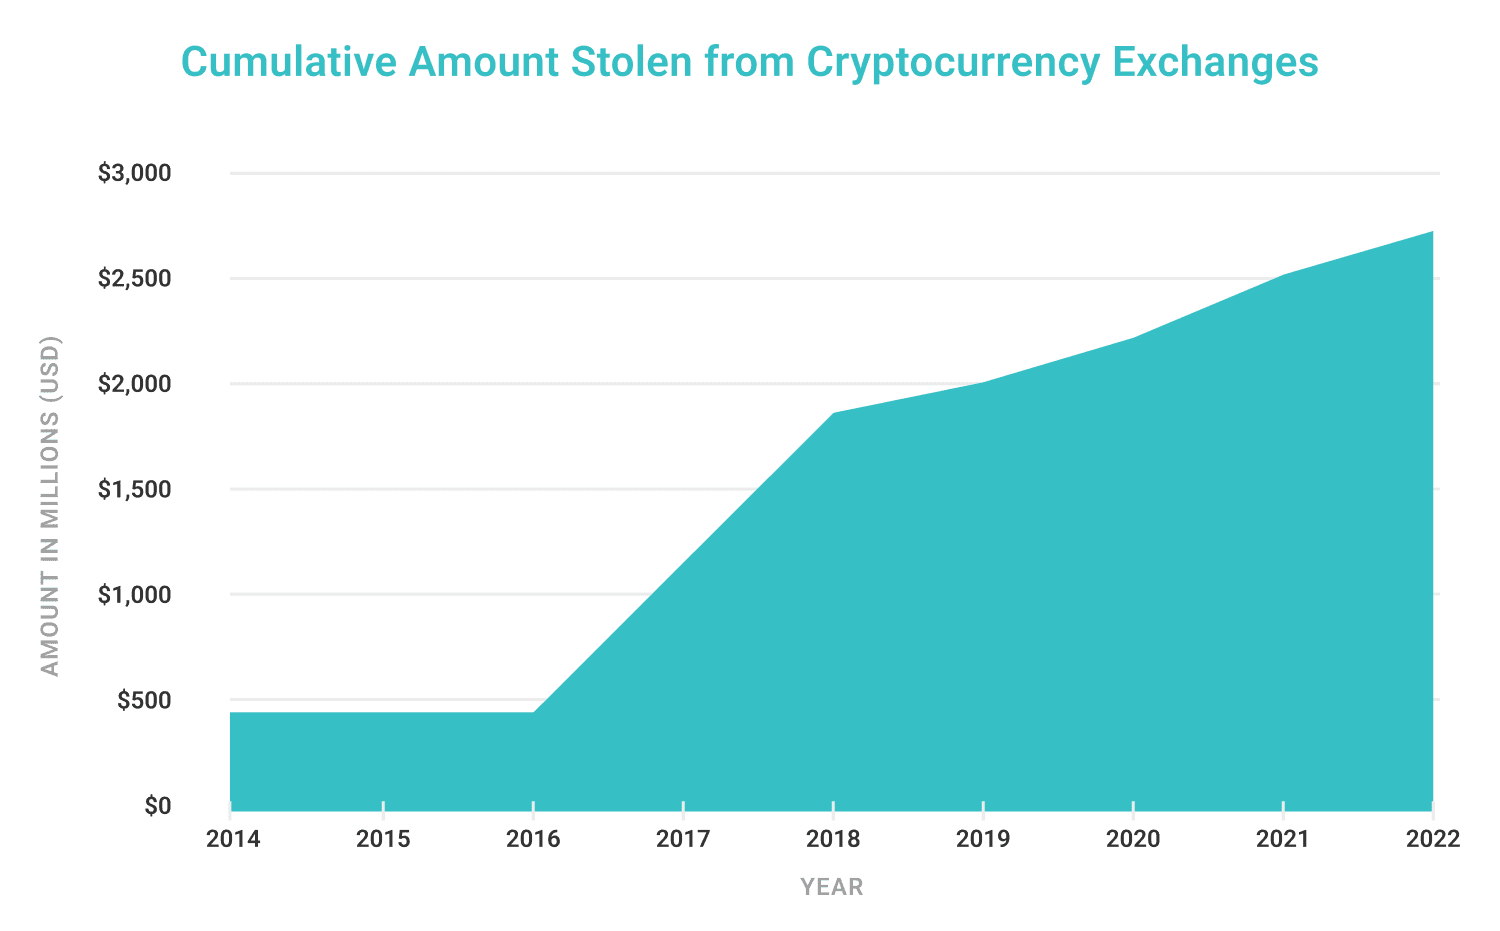 Cumulative Amount Stolen from Cryptocurrency Exchanges